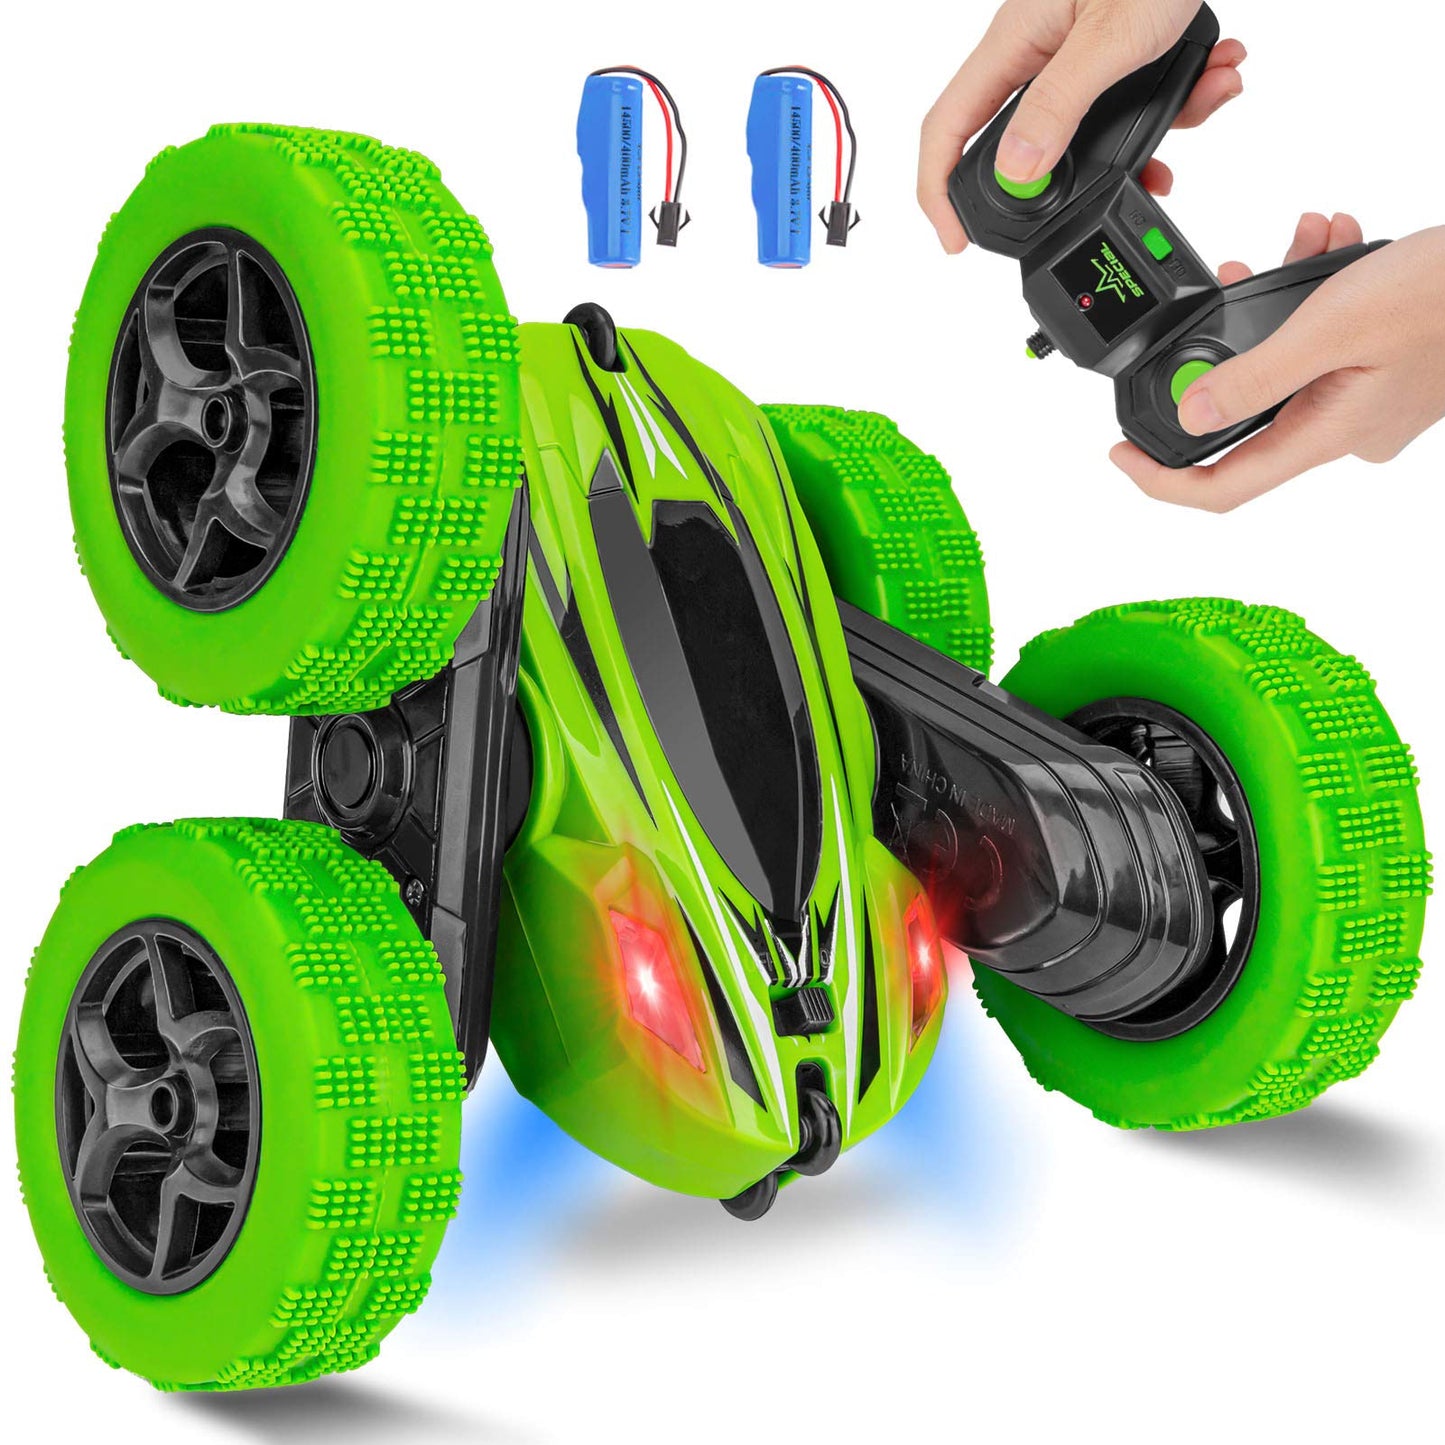 Remote Control Car RC Stunt Car Toy, Double Sided 360隆茫Rotating Tumbling Rechargeable Car, High Speed 2.4Ghz Remote Control Race Car, 4WD Off Road Vehicle, 3D Deformation Car 1:24, Great Gift for Kids